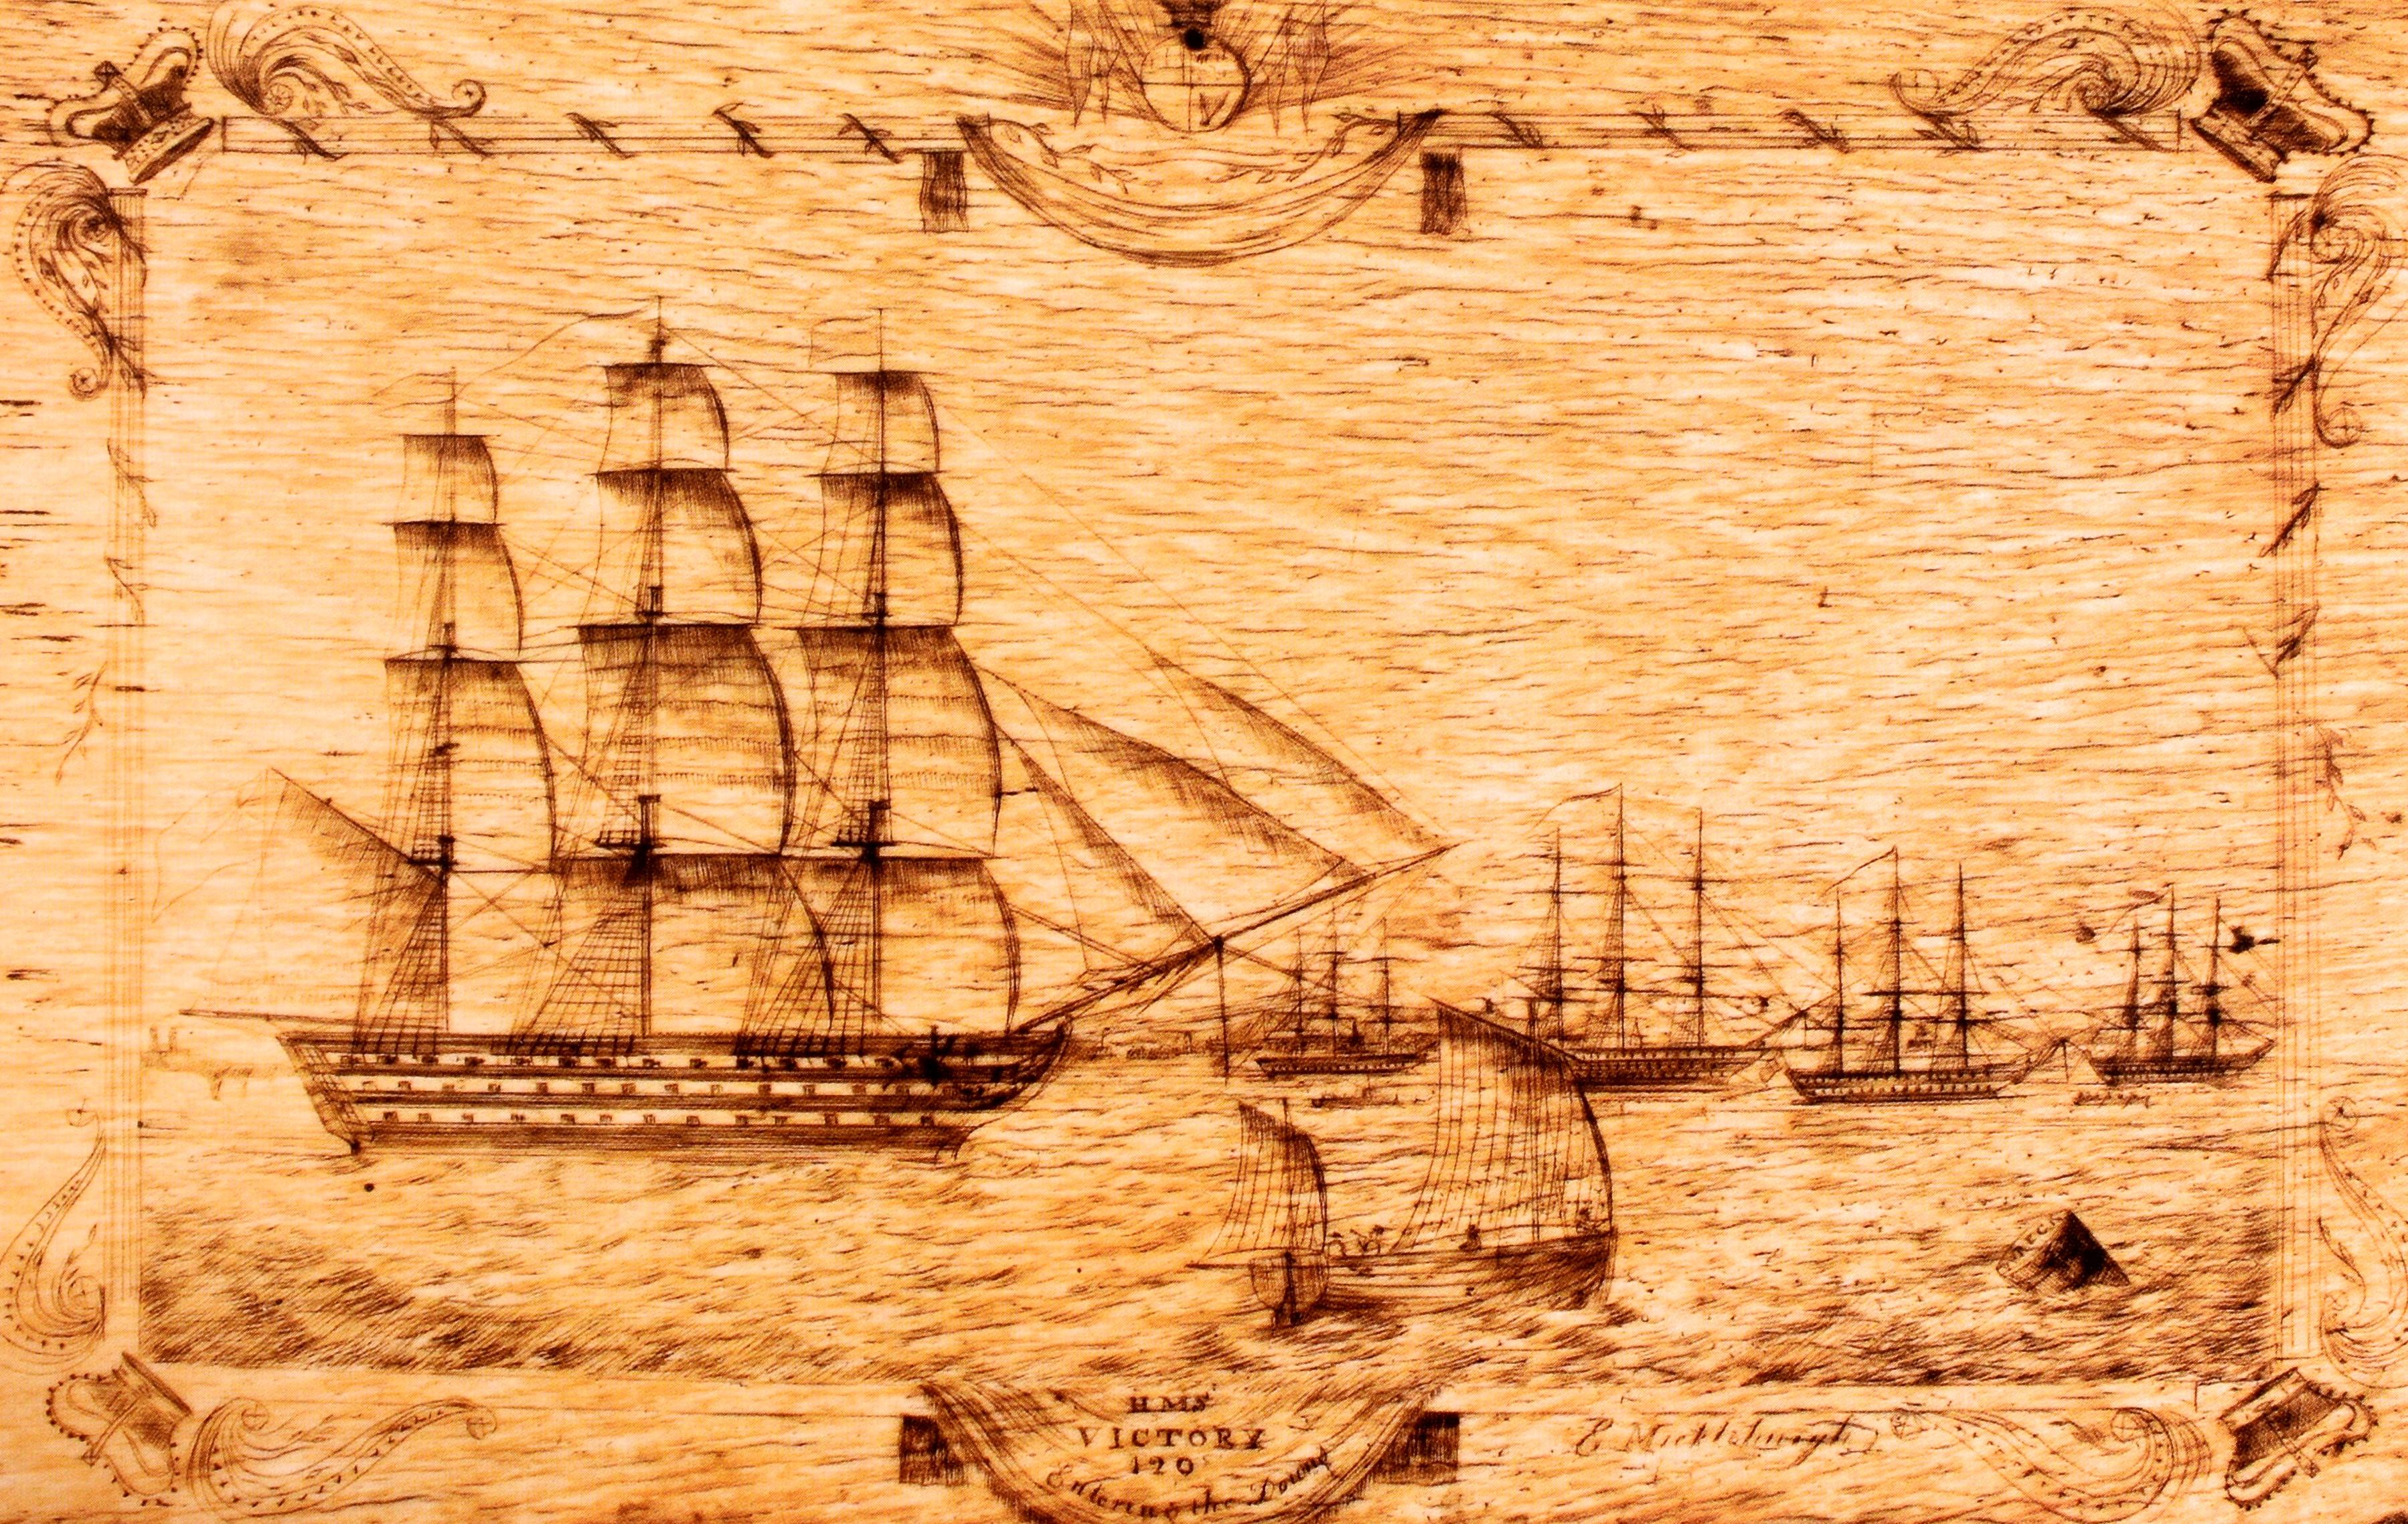 Ingenious Contrivances, Curiously Carved Scrimshaw, New Bedford Whaling Museum For Sale 5